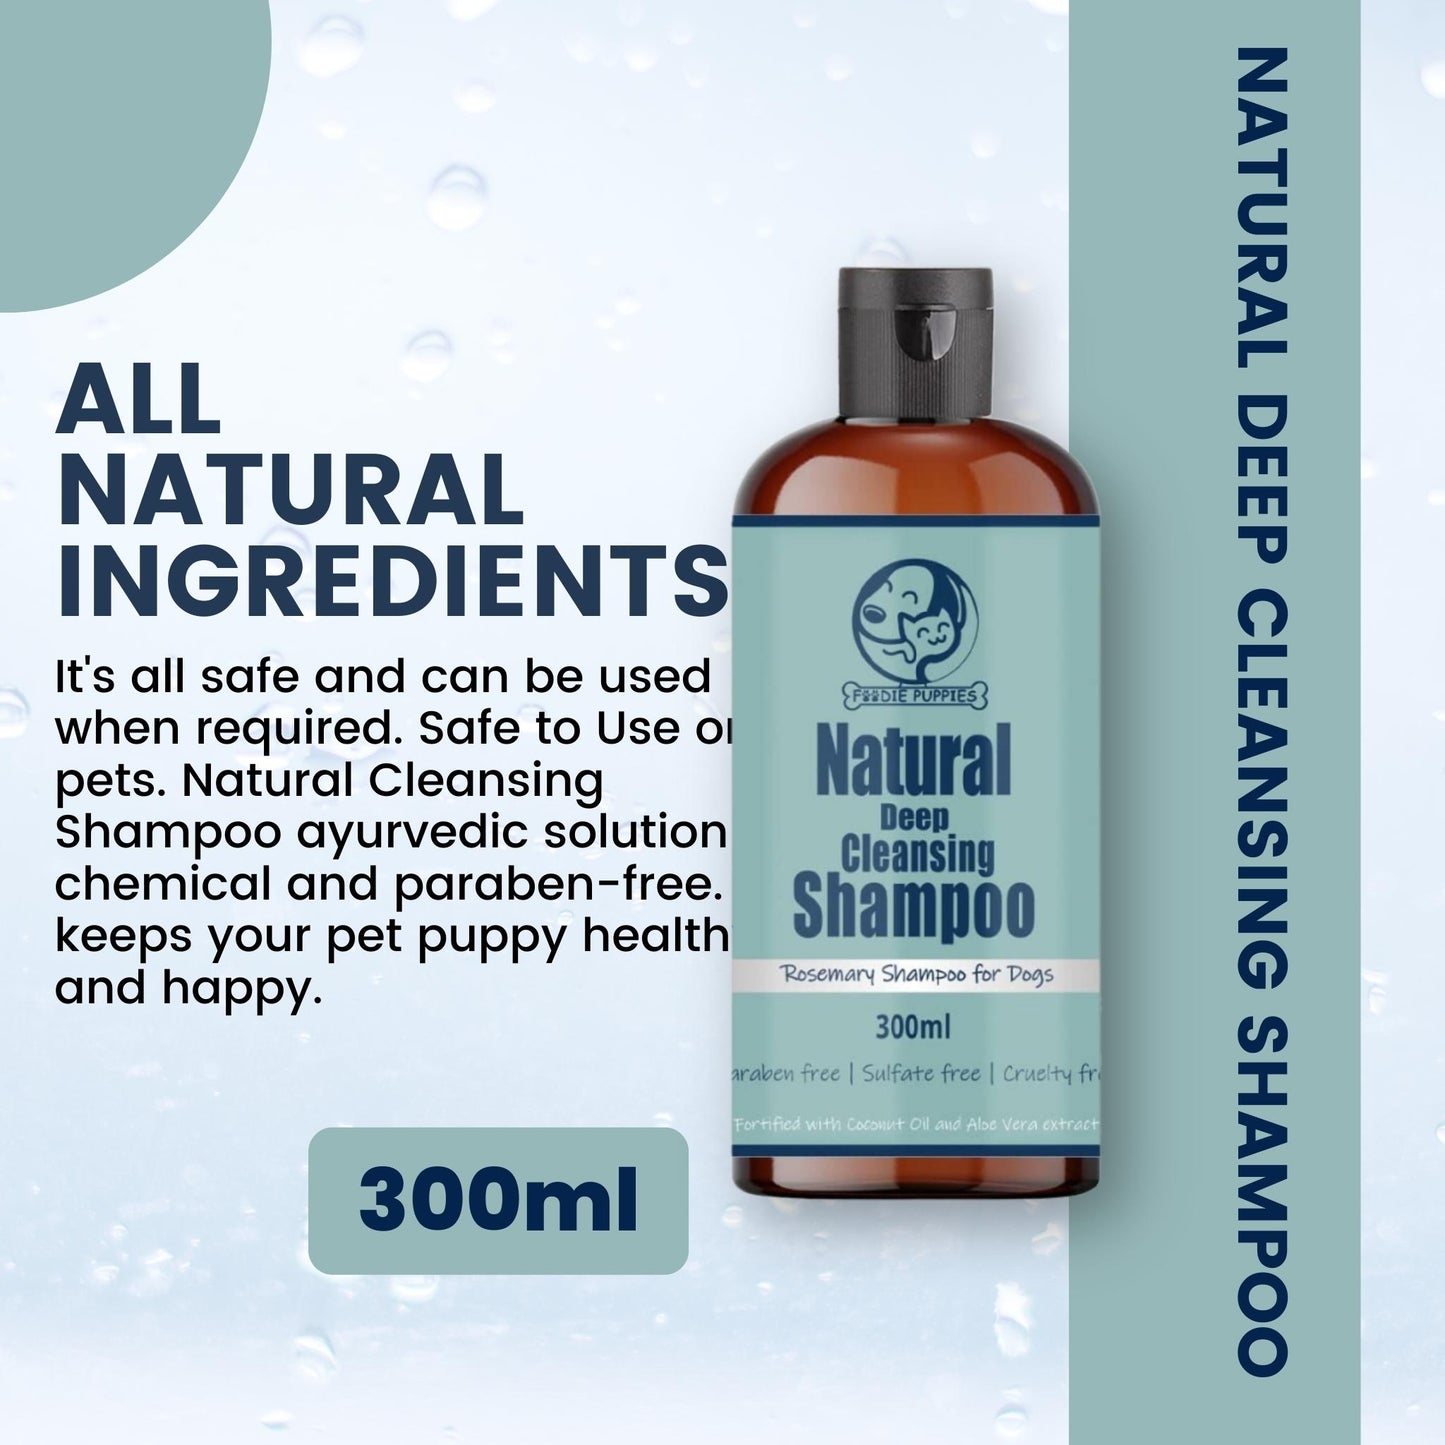 Foodie Puppies Natural Deep Cleansing Rosemary Dogs' Shampoo - 300 ml